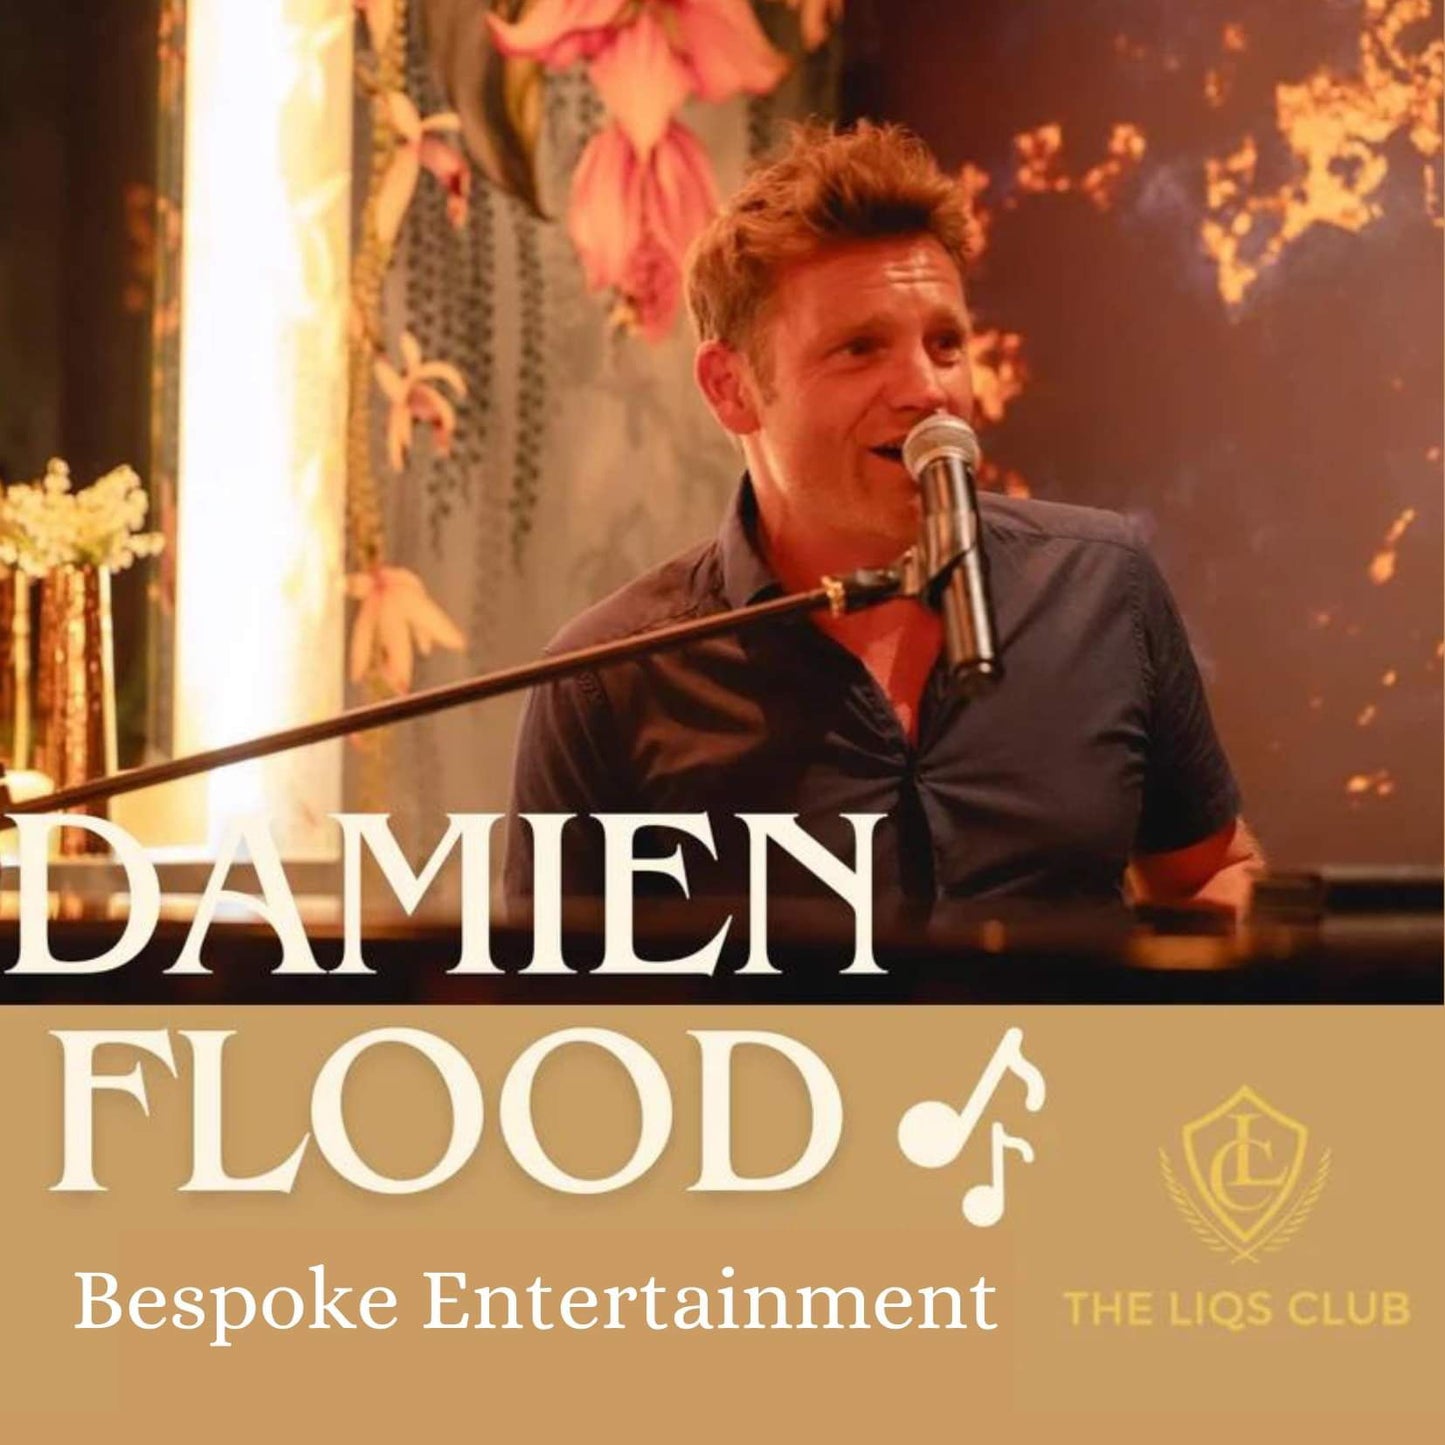 An evening with Damien Flood at his Piano - Saturday 28th September 2024 - Doors open 7pm show time 8.30.